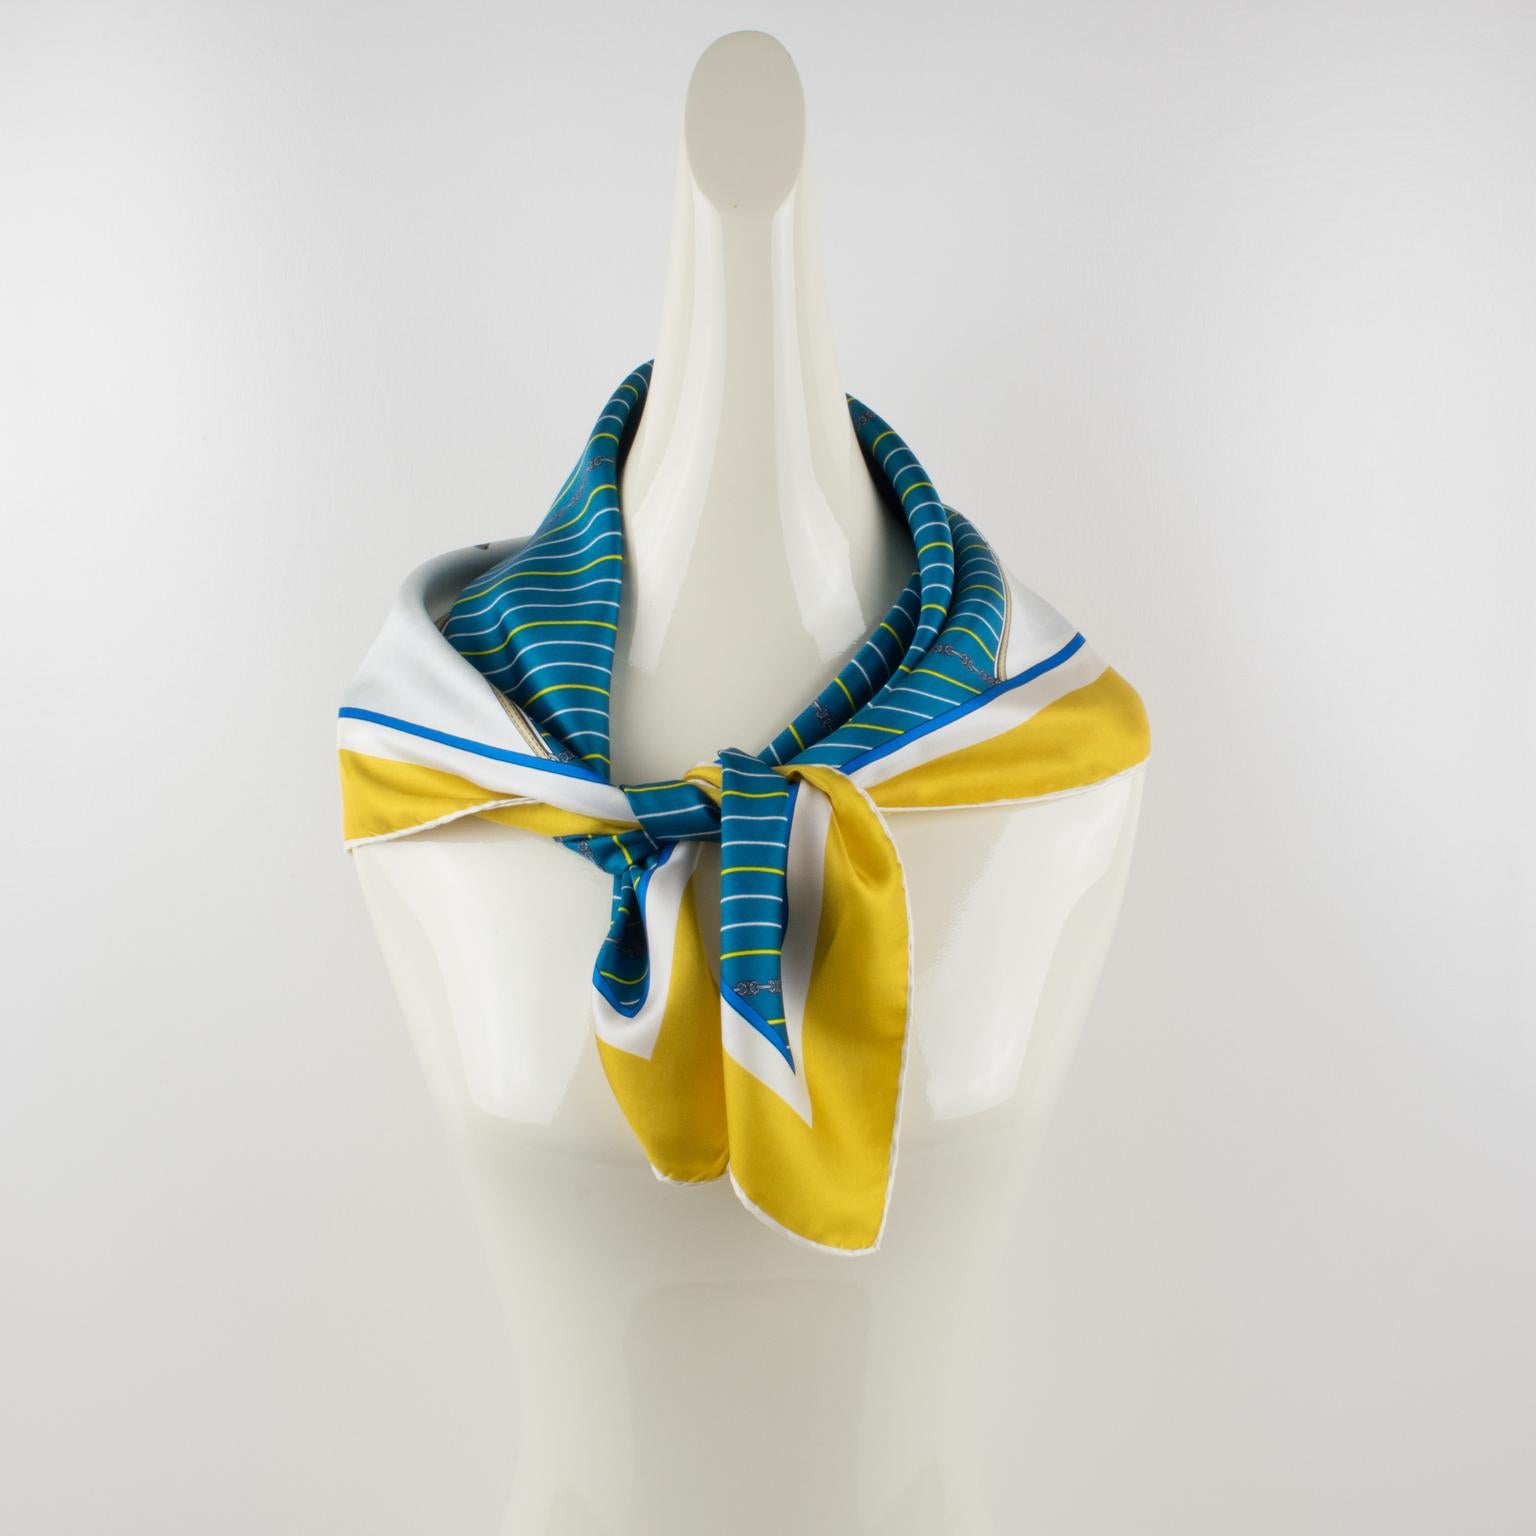 Elegant silk scarf by Celine Paris. A geometric print pattern with an equestrian design of riding helmet, whip, and gloves in a combination of bright blue, white, and yellow colors with a yellow and white border. Signed Celine Paris in the bottom